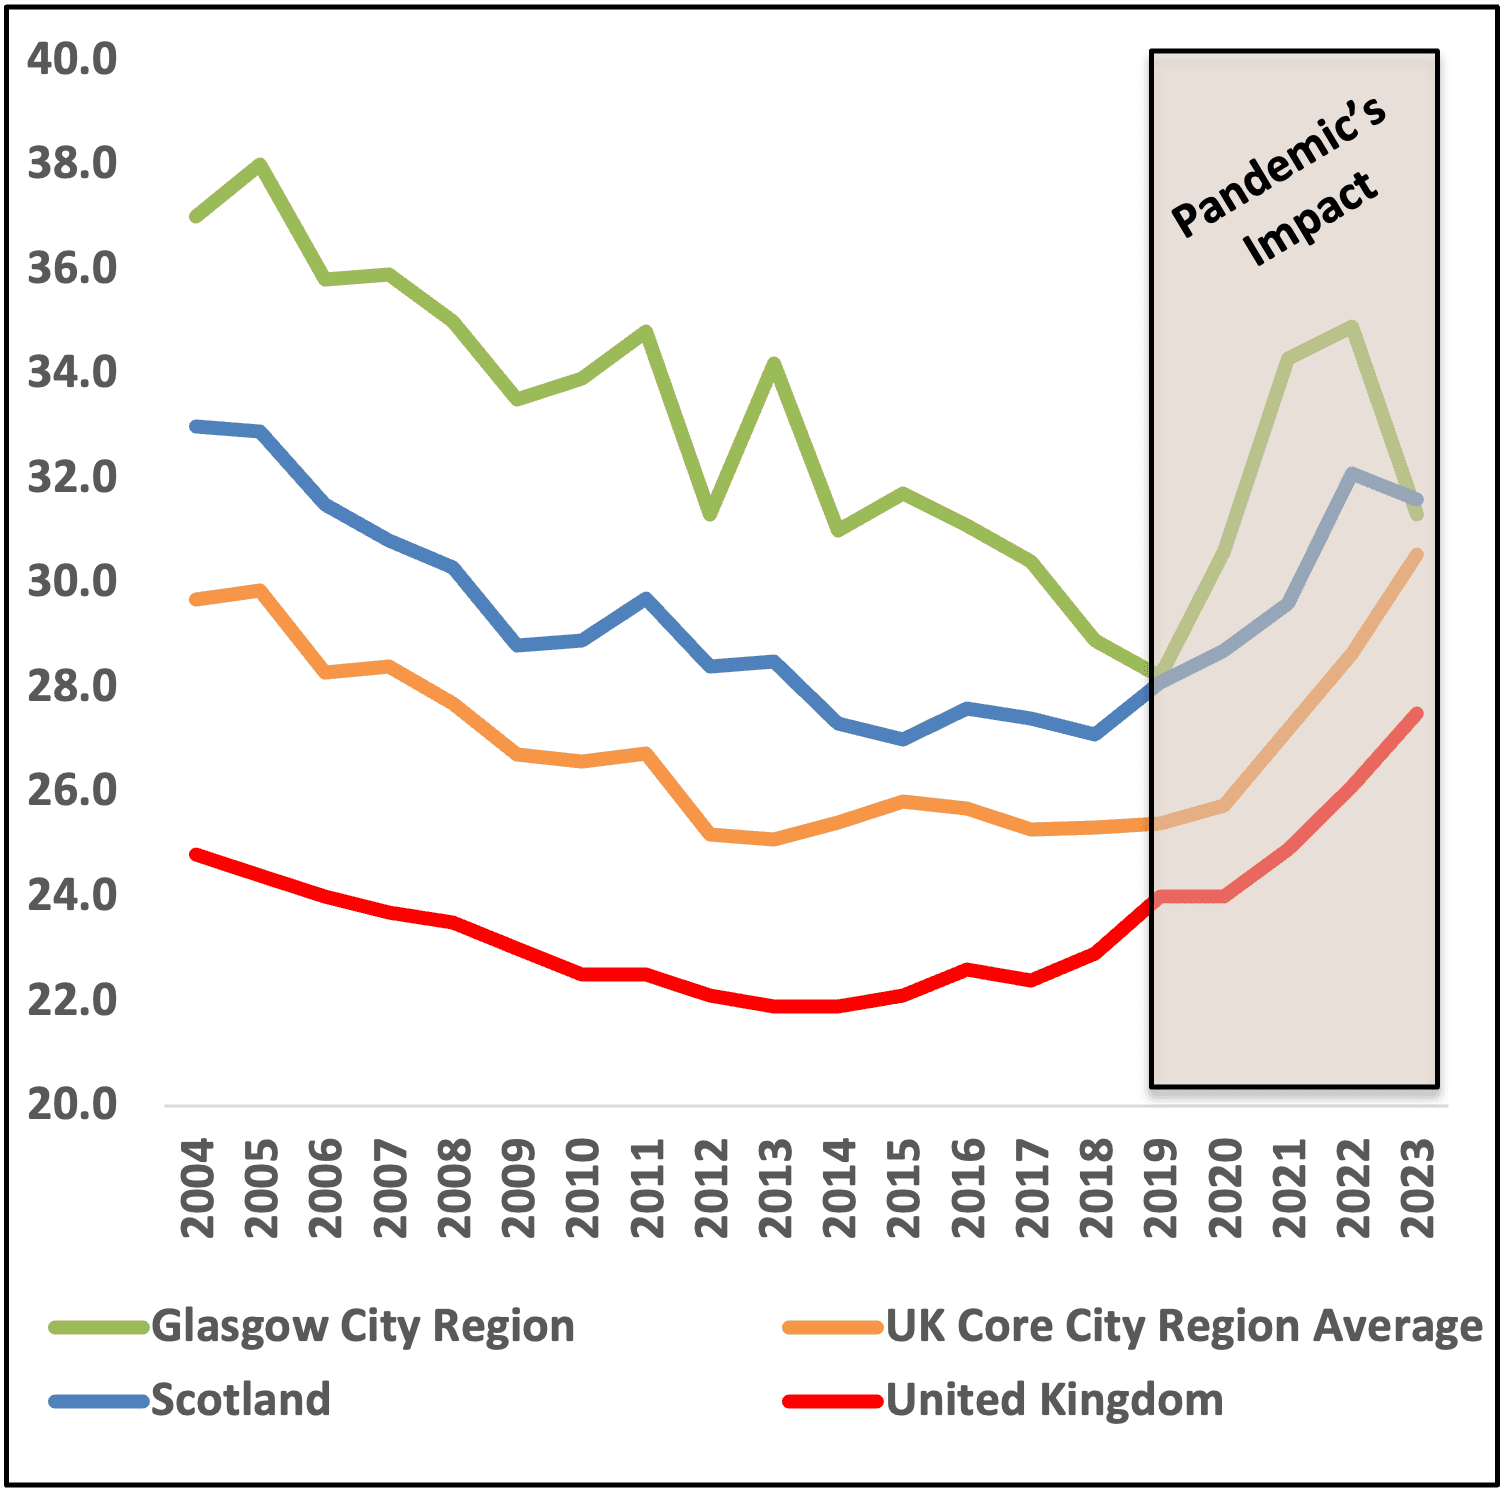 Graph showing the percentage of economic inactivity that is due to long term sickness across different geographies like Glasgow City Region, Scotland and the UK. It shows that Glasgow City Region and Scotland have elevated levels, despite recent improvements.